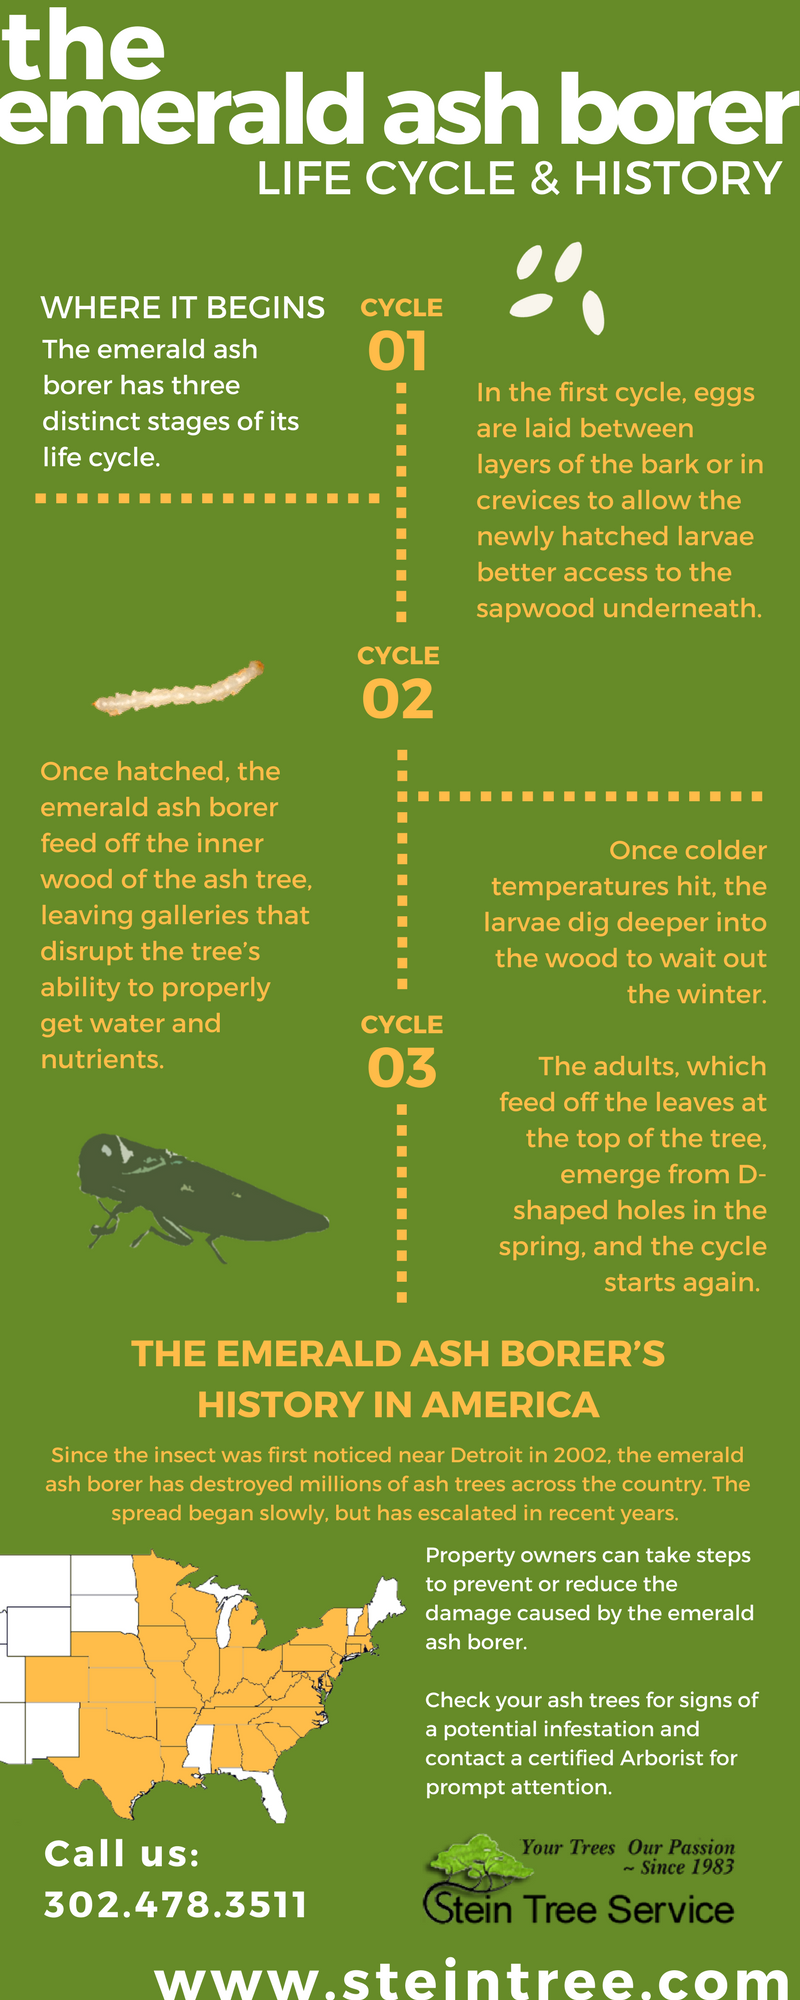 Inspect for Emerald Ash Borer Lifecycle and History - Stein Tree Service